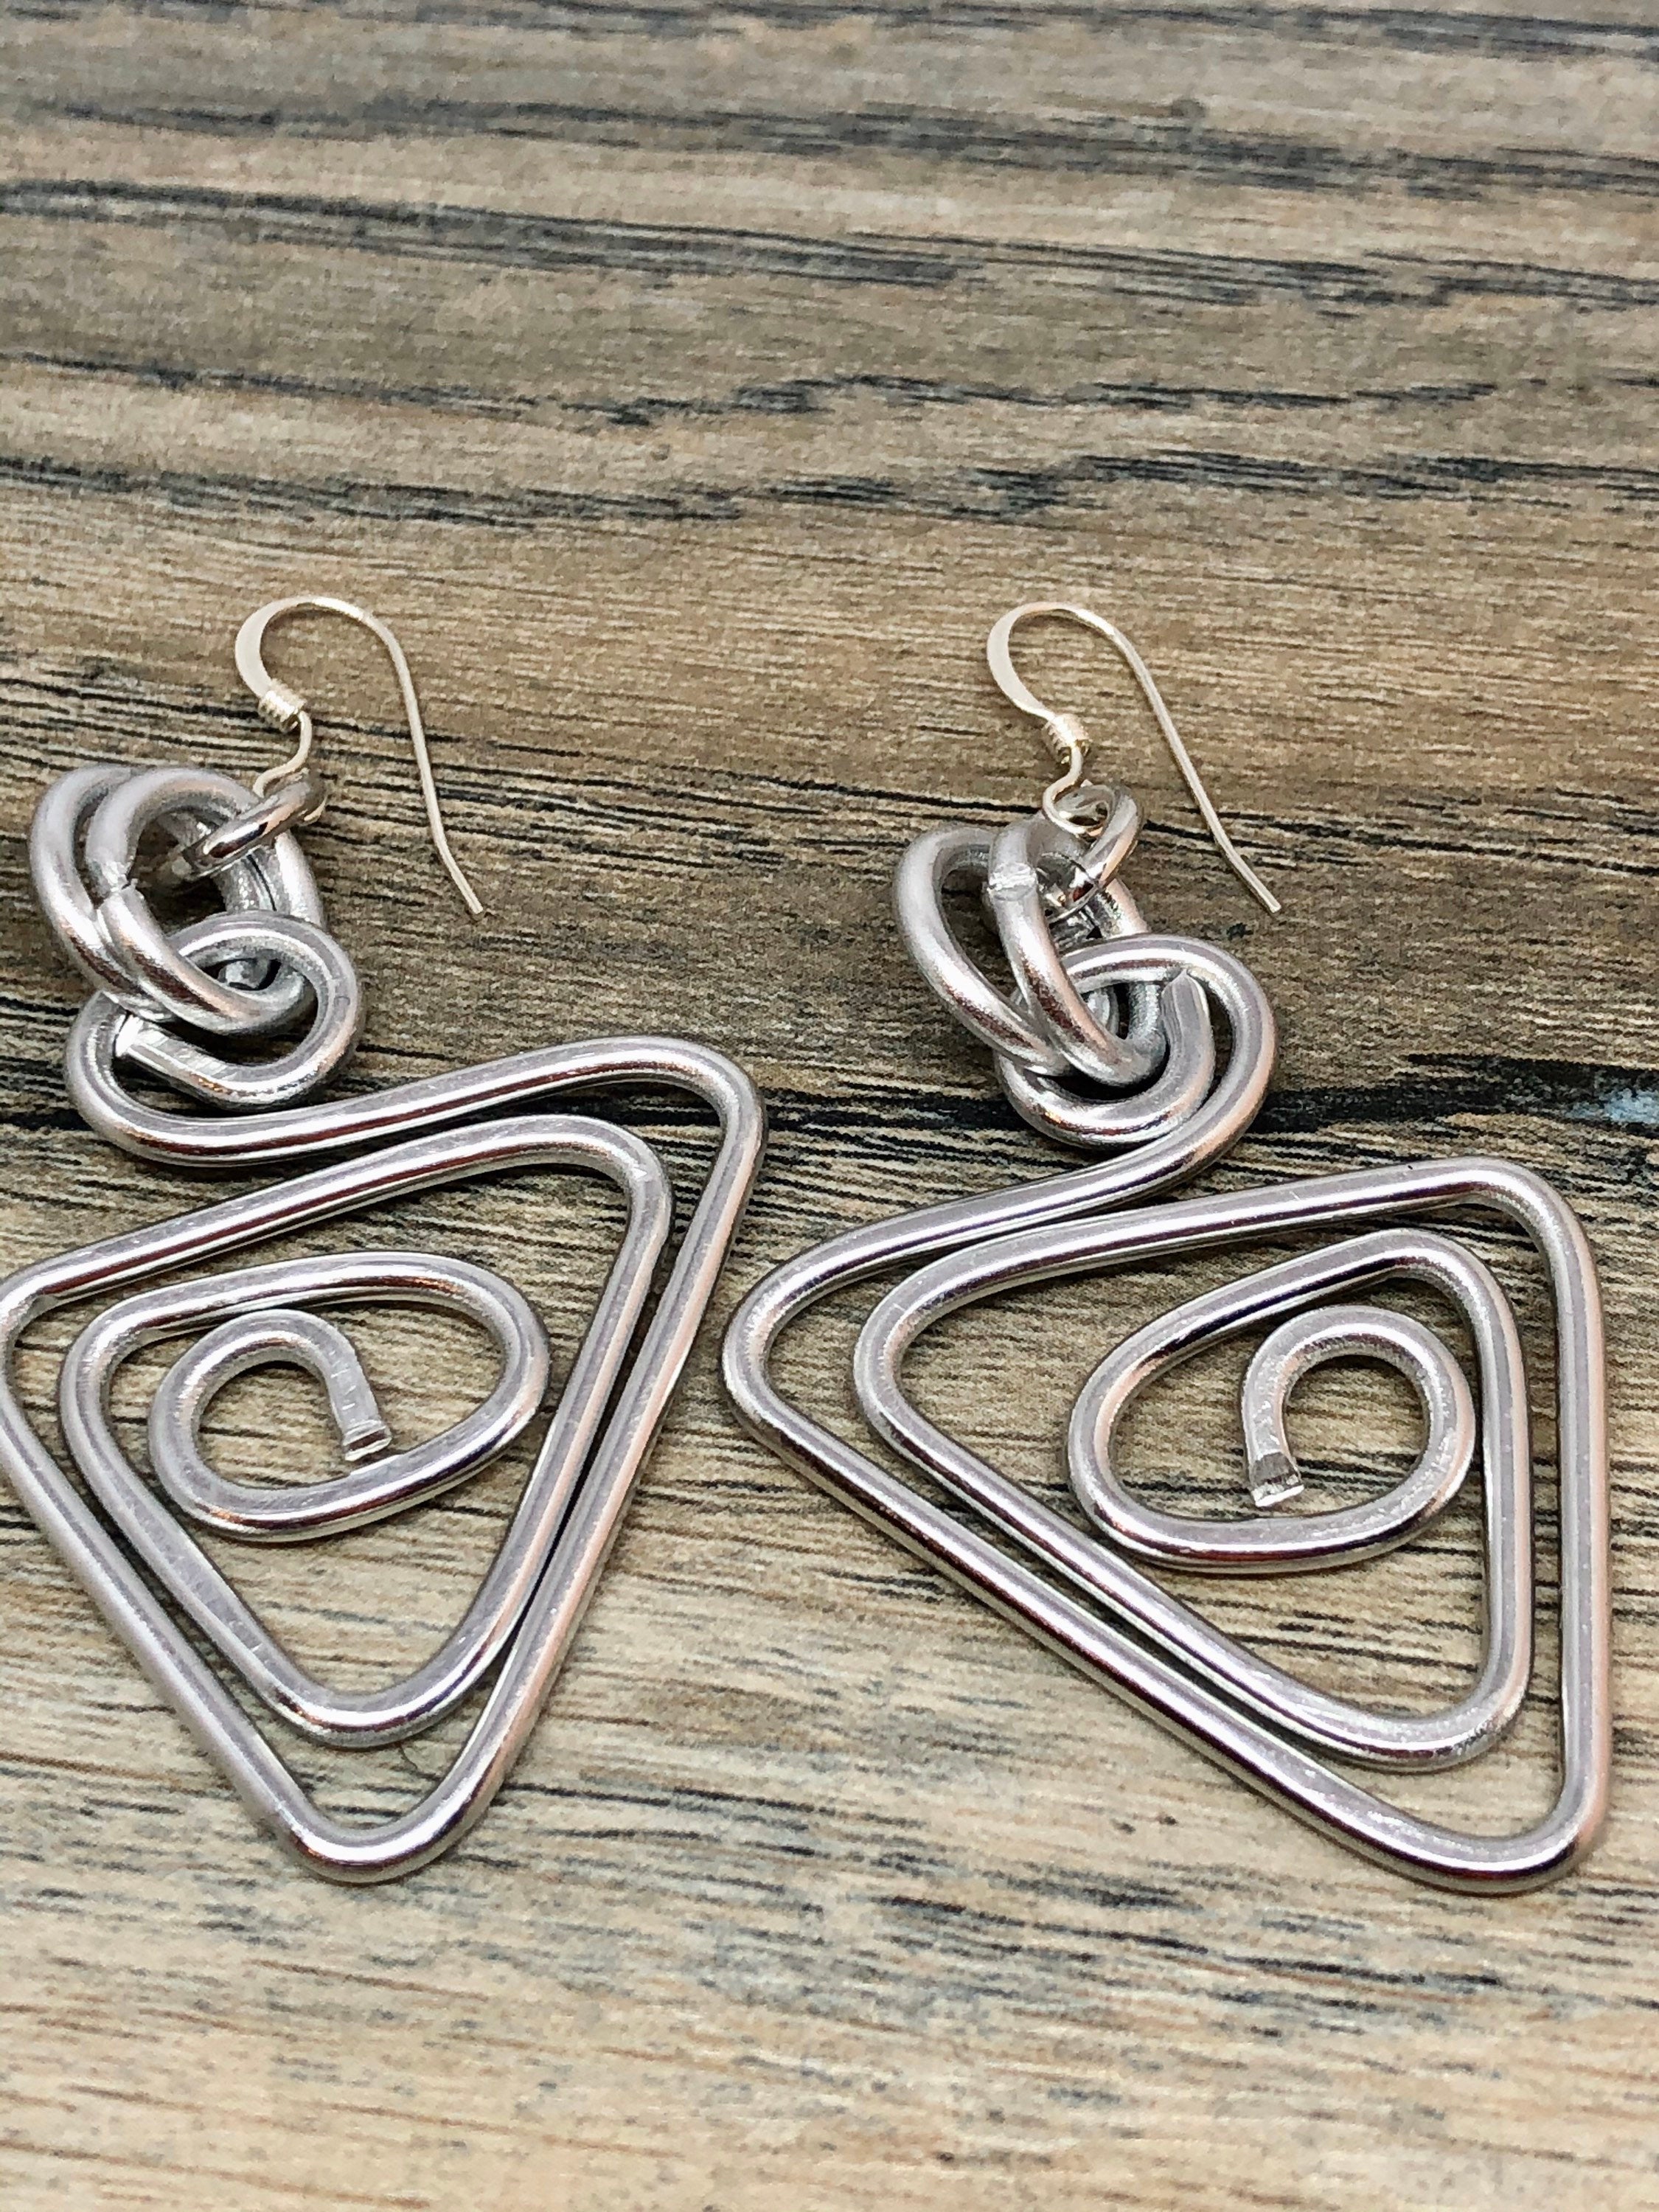 Silver Triangle Earrings with sterling silver ear-wires, Little everyday earrings